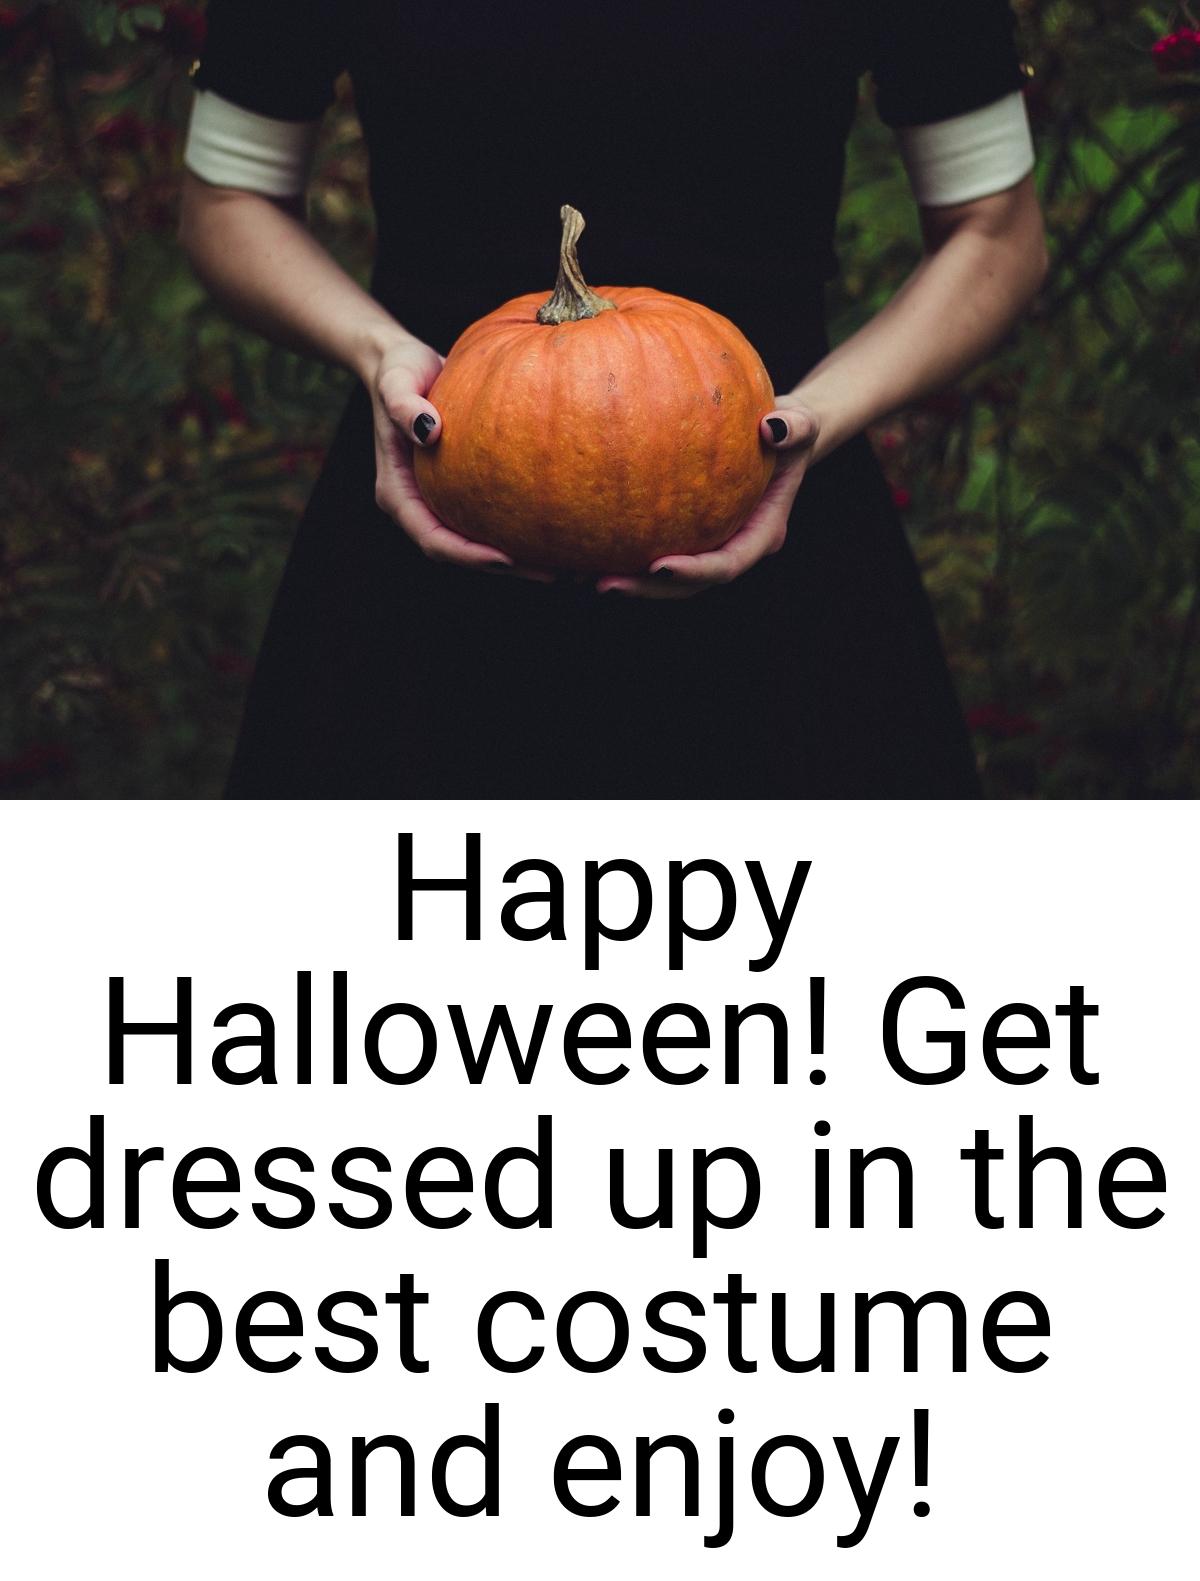 Happy Halloween! Get dressed up in the best costume and